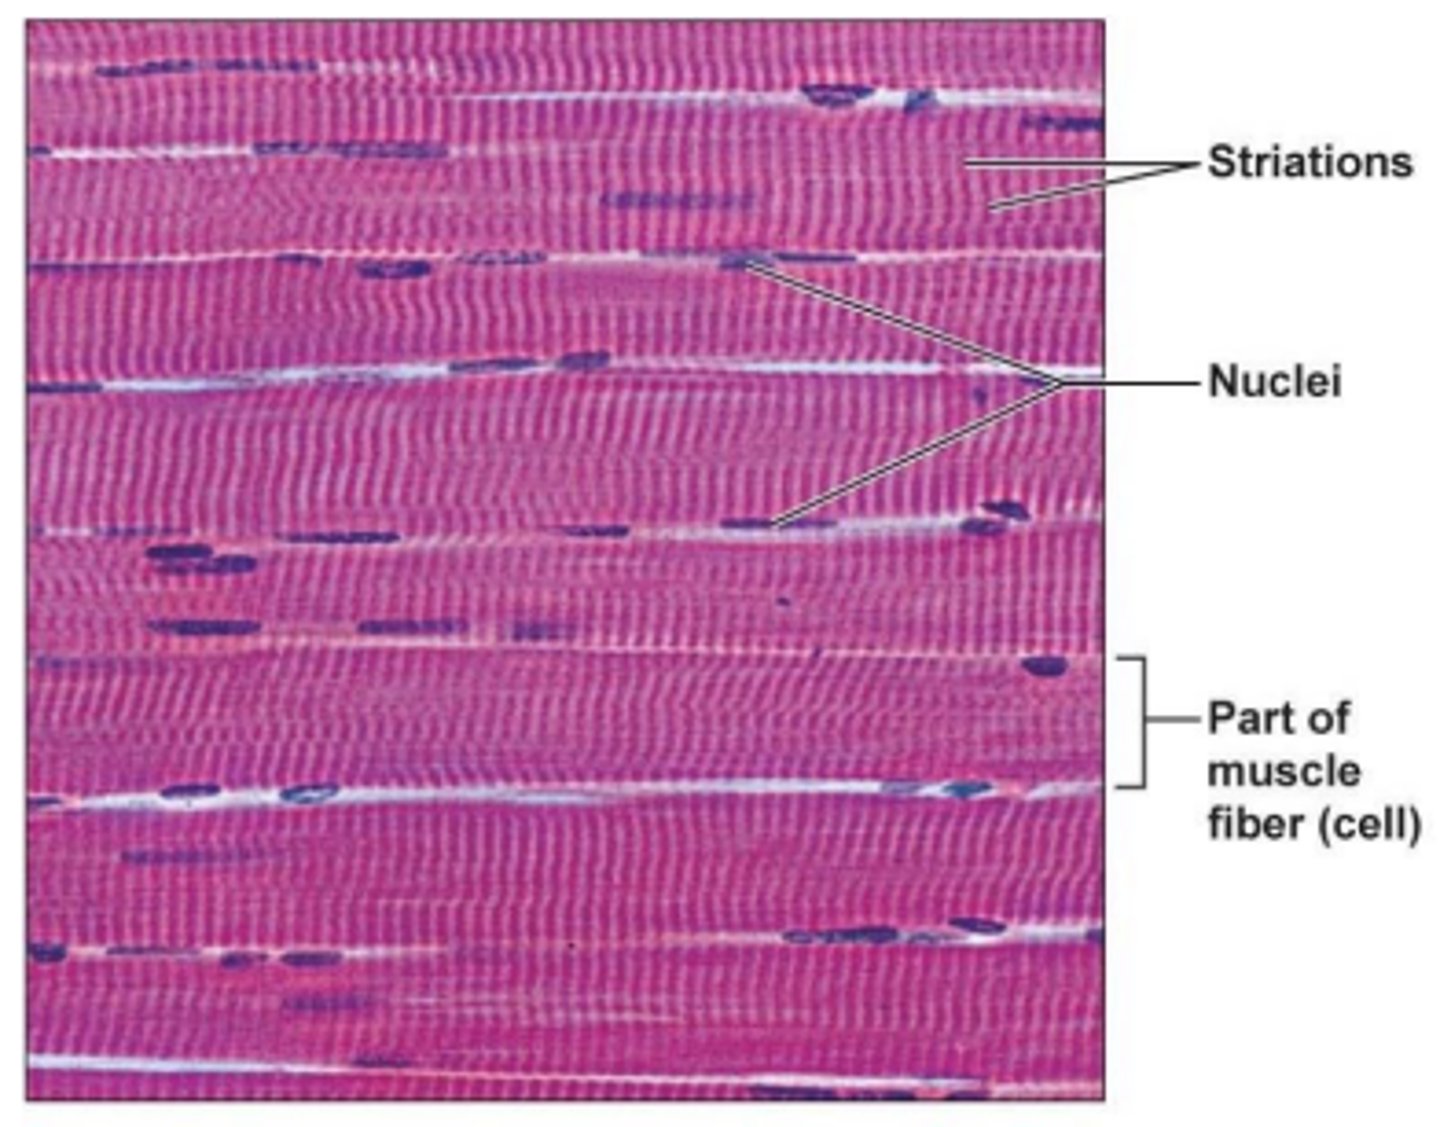 <p>- long cylindrical and multinucleate</p><p>- contains obvious striations</p><p>- poor regeneration</p>